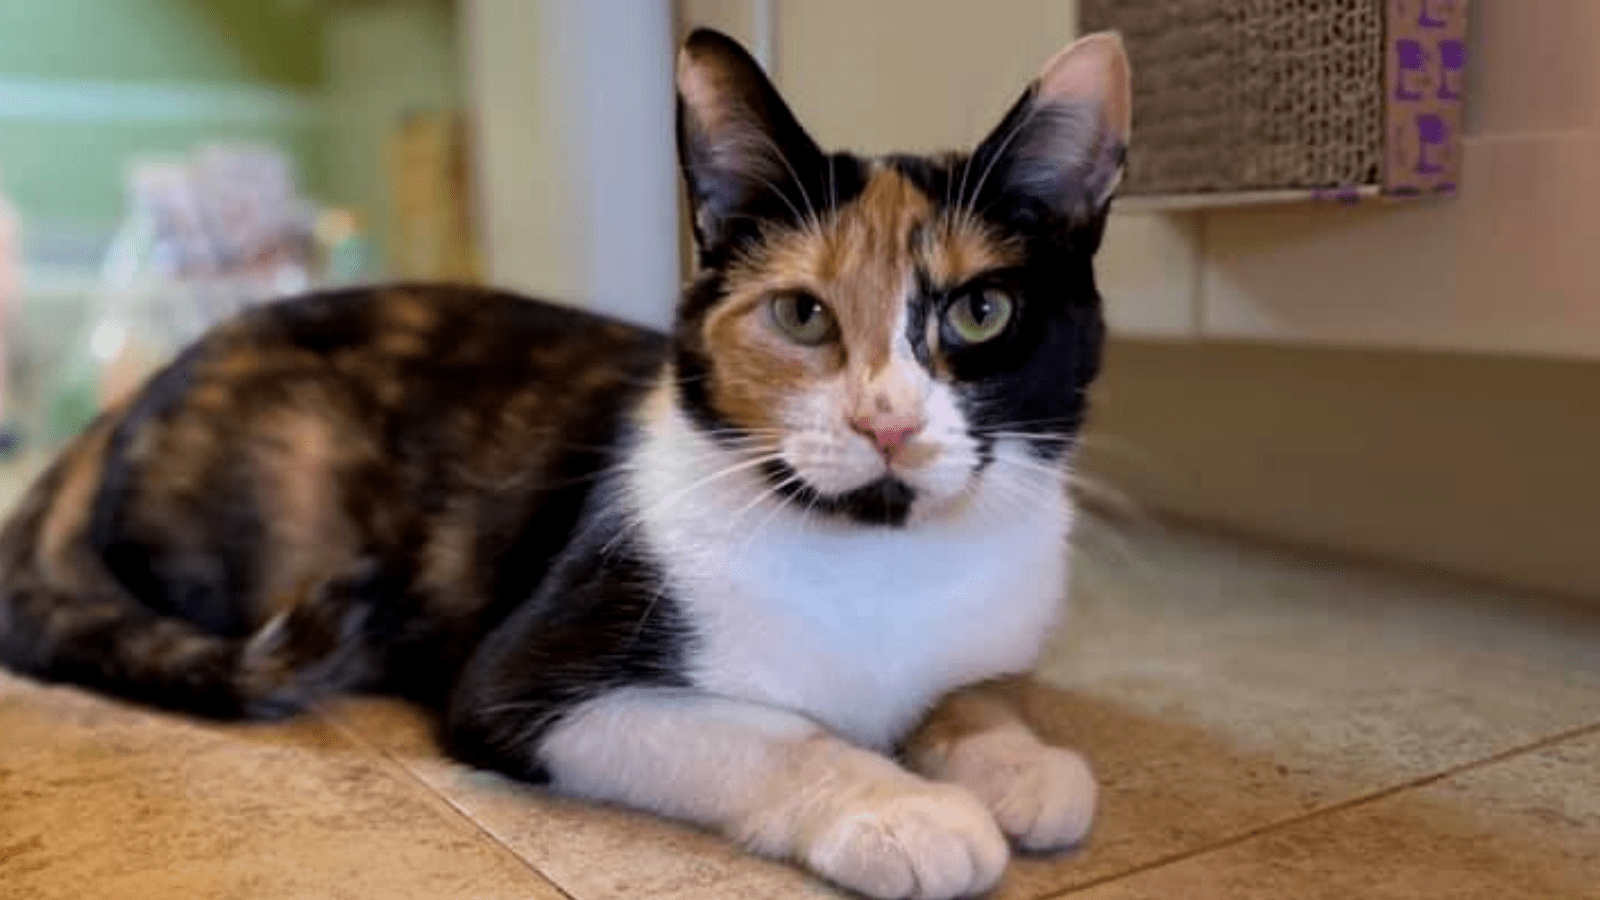 A calico cat in a foster home